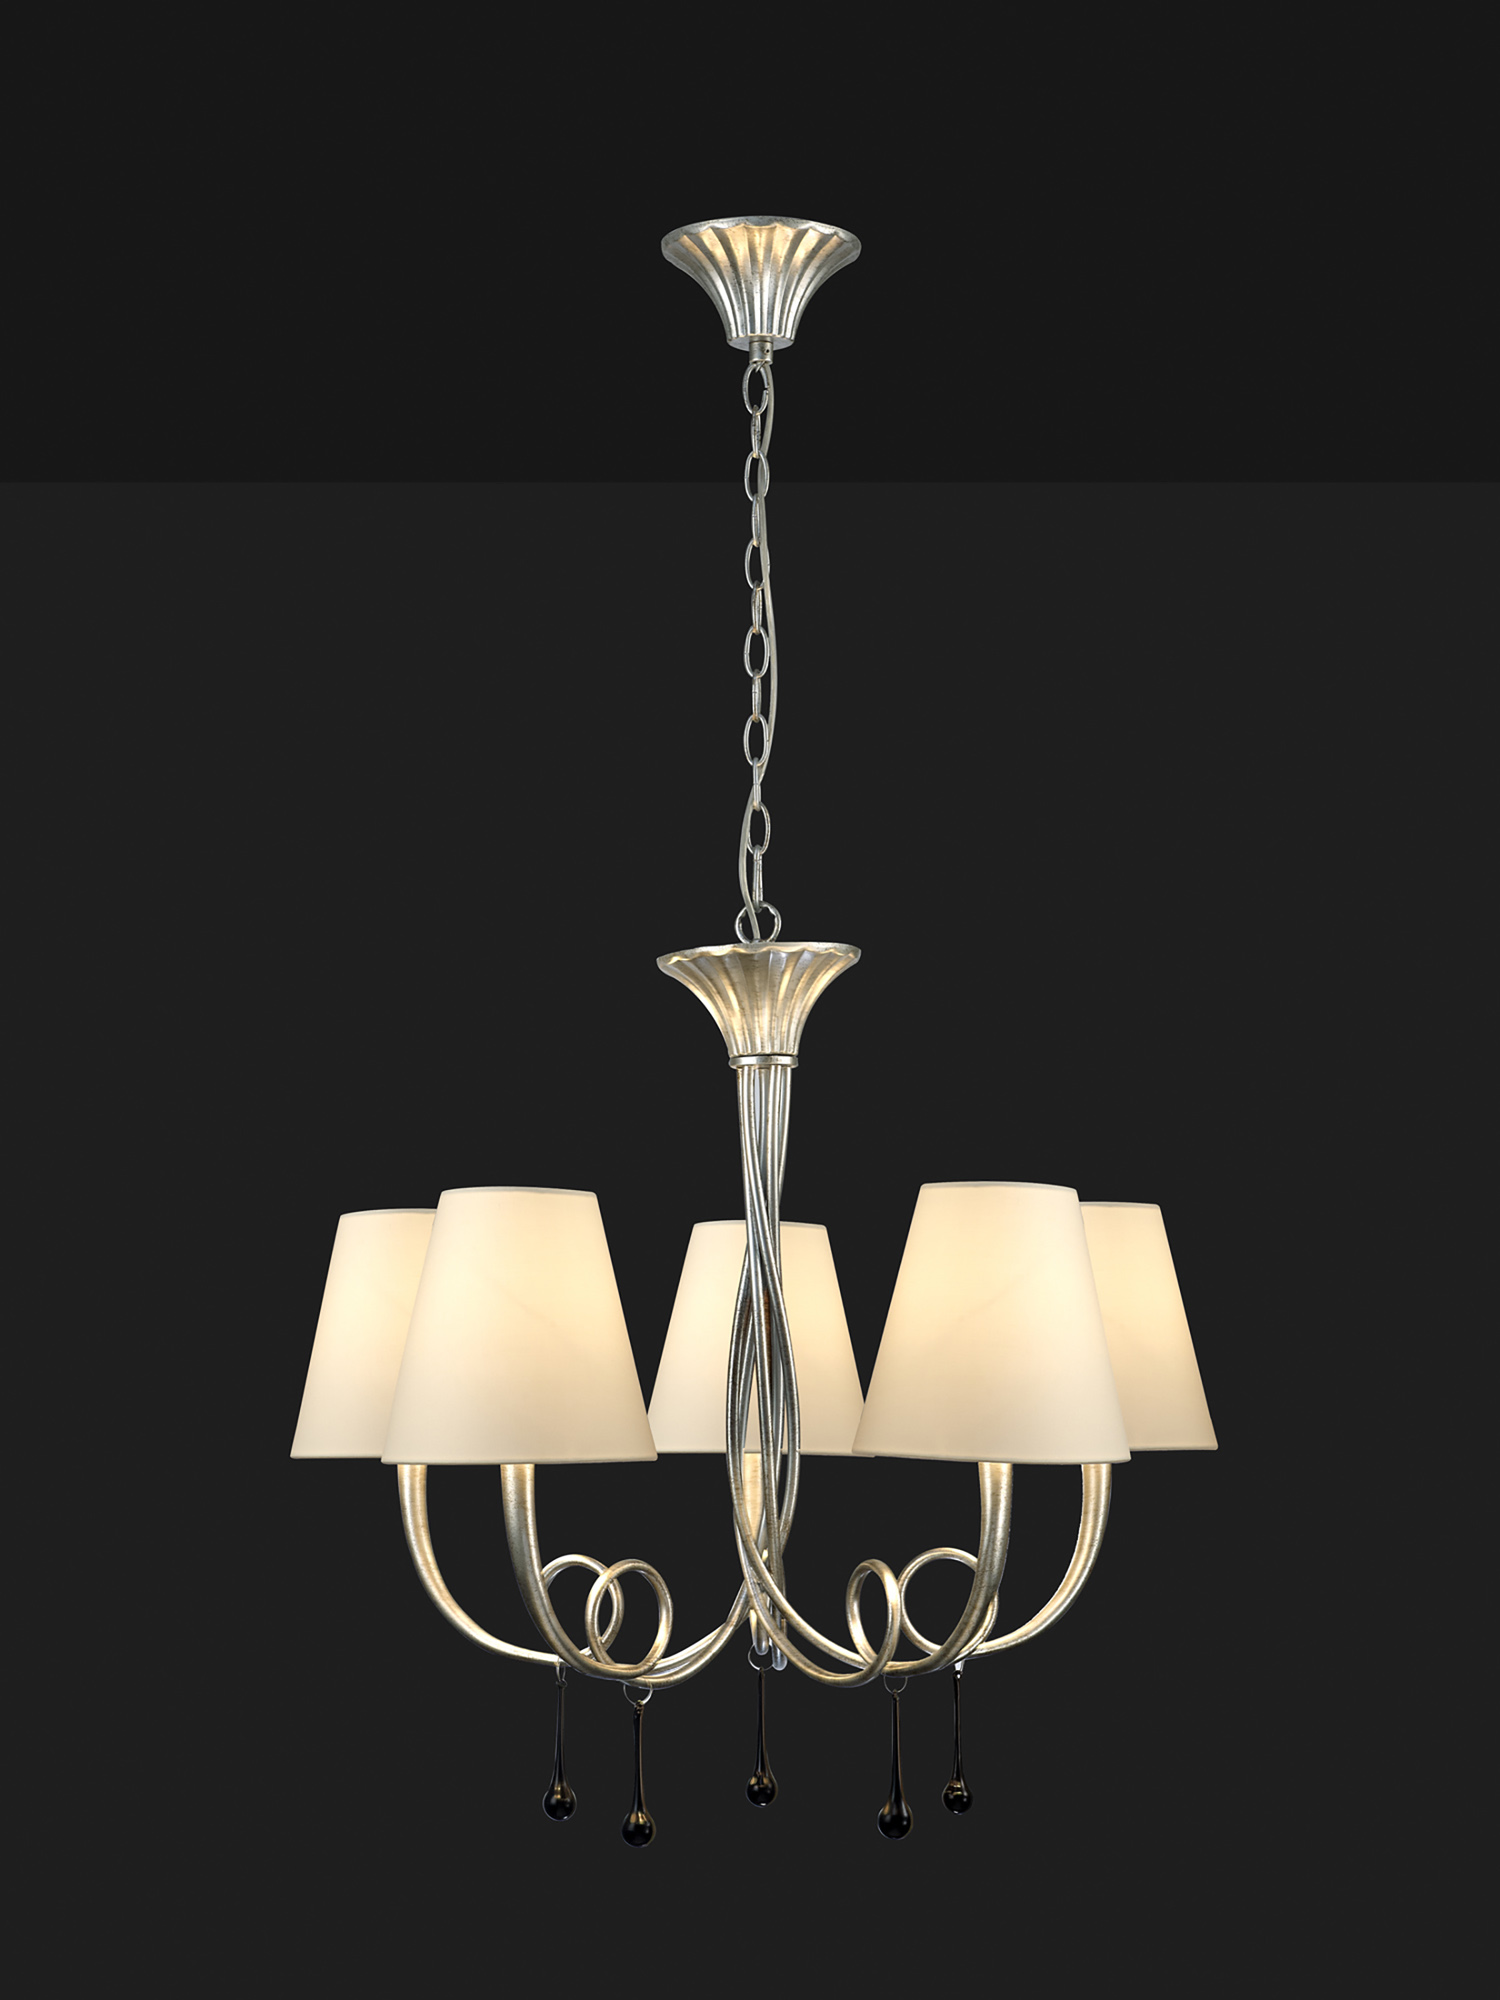 Paola Silver-Cream Ceiling Lights Mantra Multi Arm Fittings